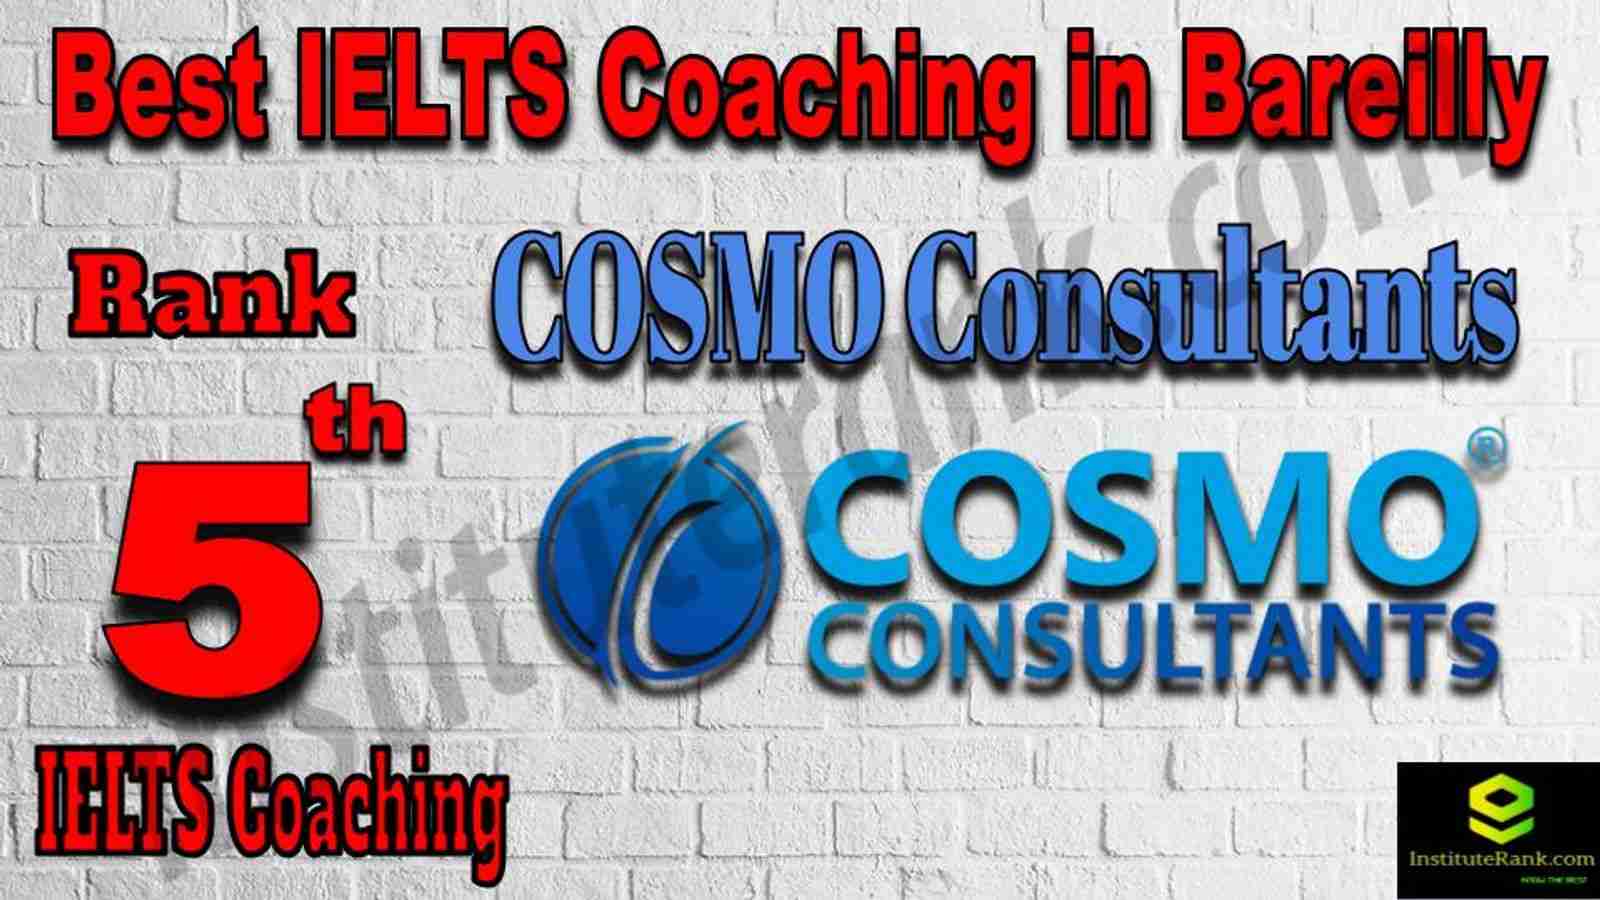 5th Best IELTS Coaching in Bareilly